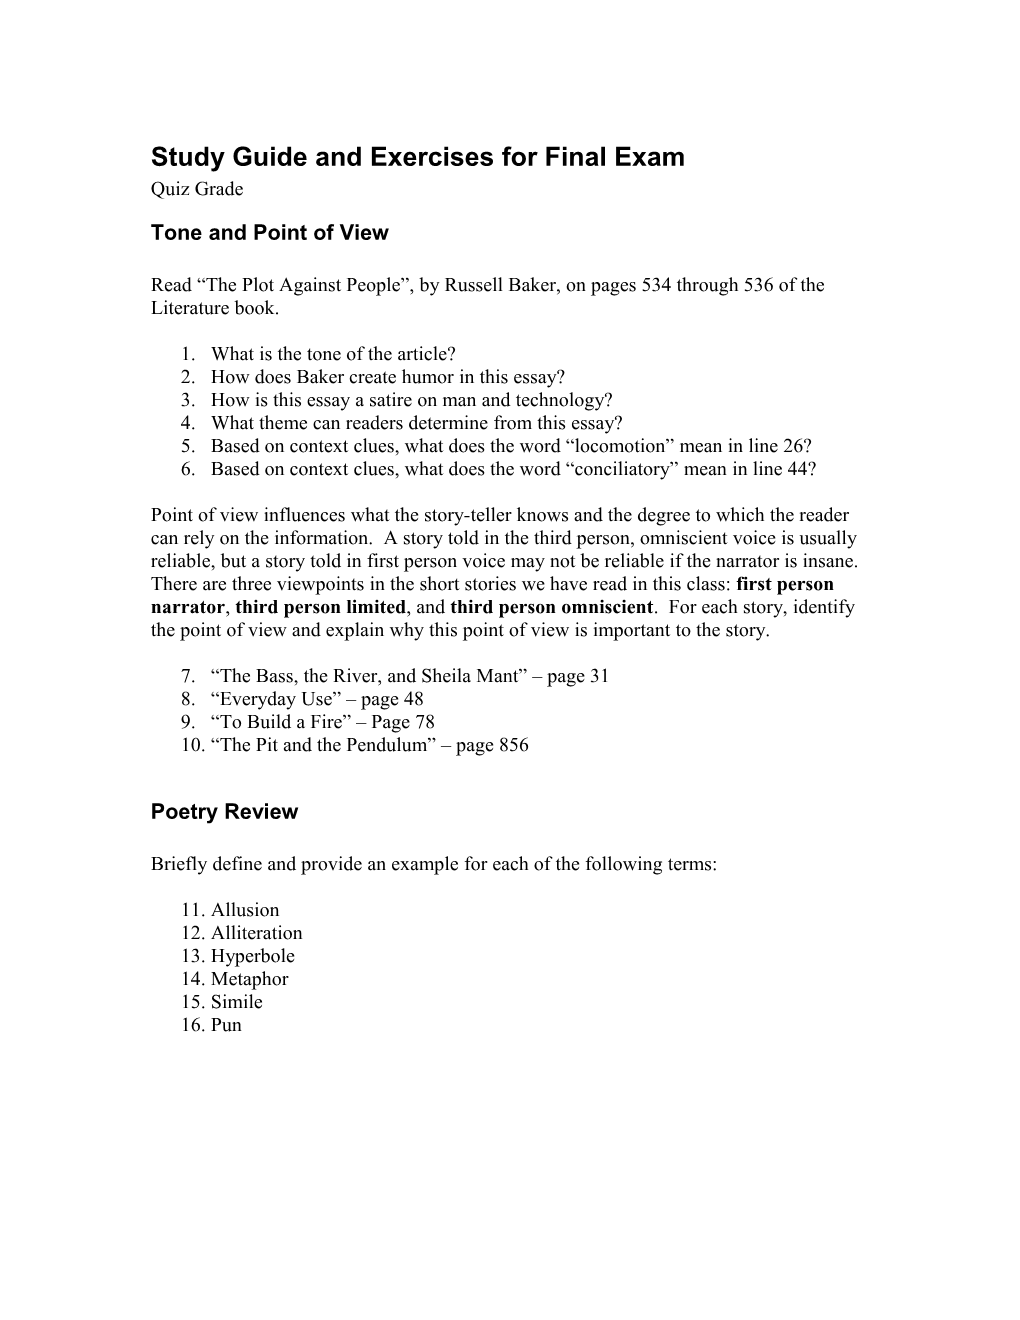 Study Guide and Exercises for Final Exam